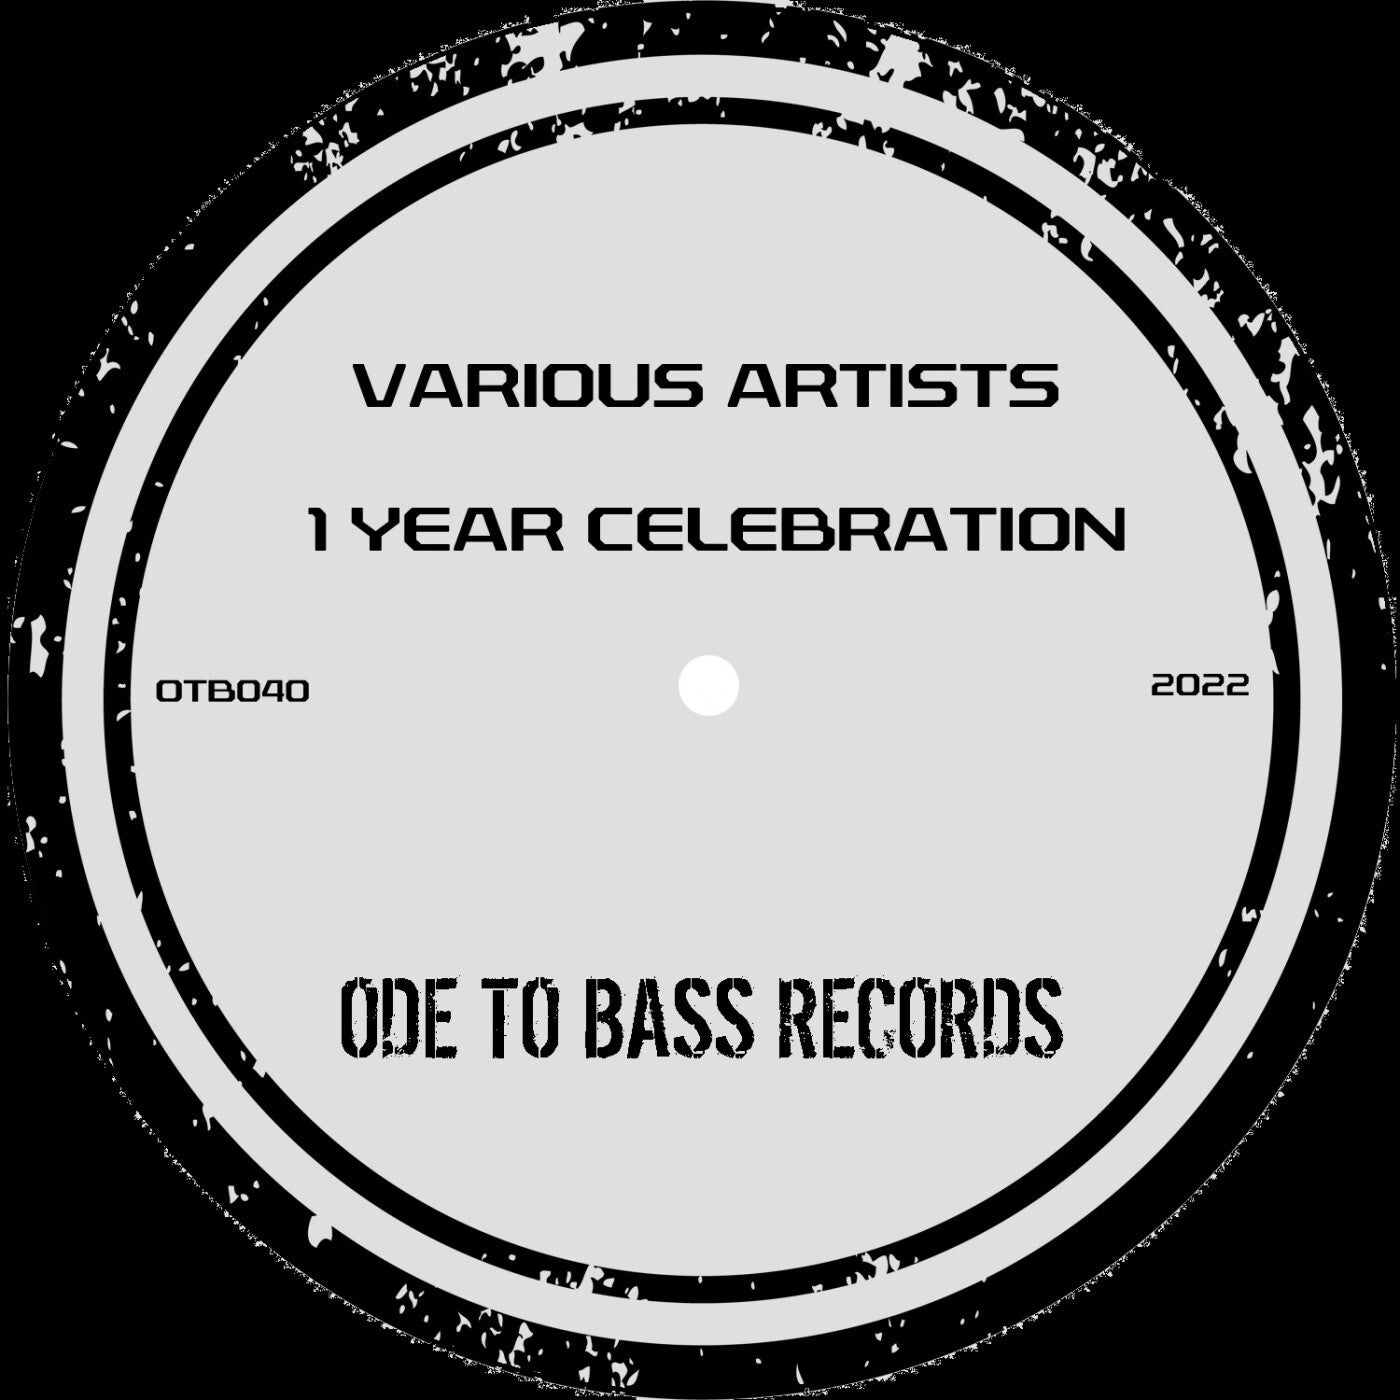 Ode To Bass Records '1 YEAR CELEBRATION'